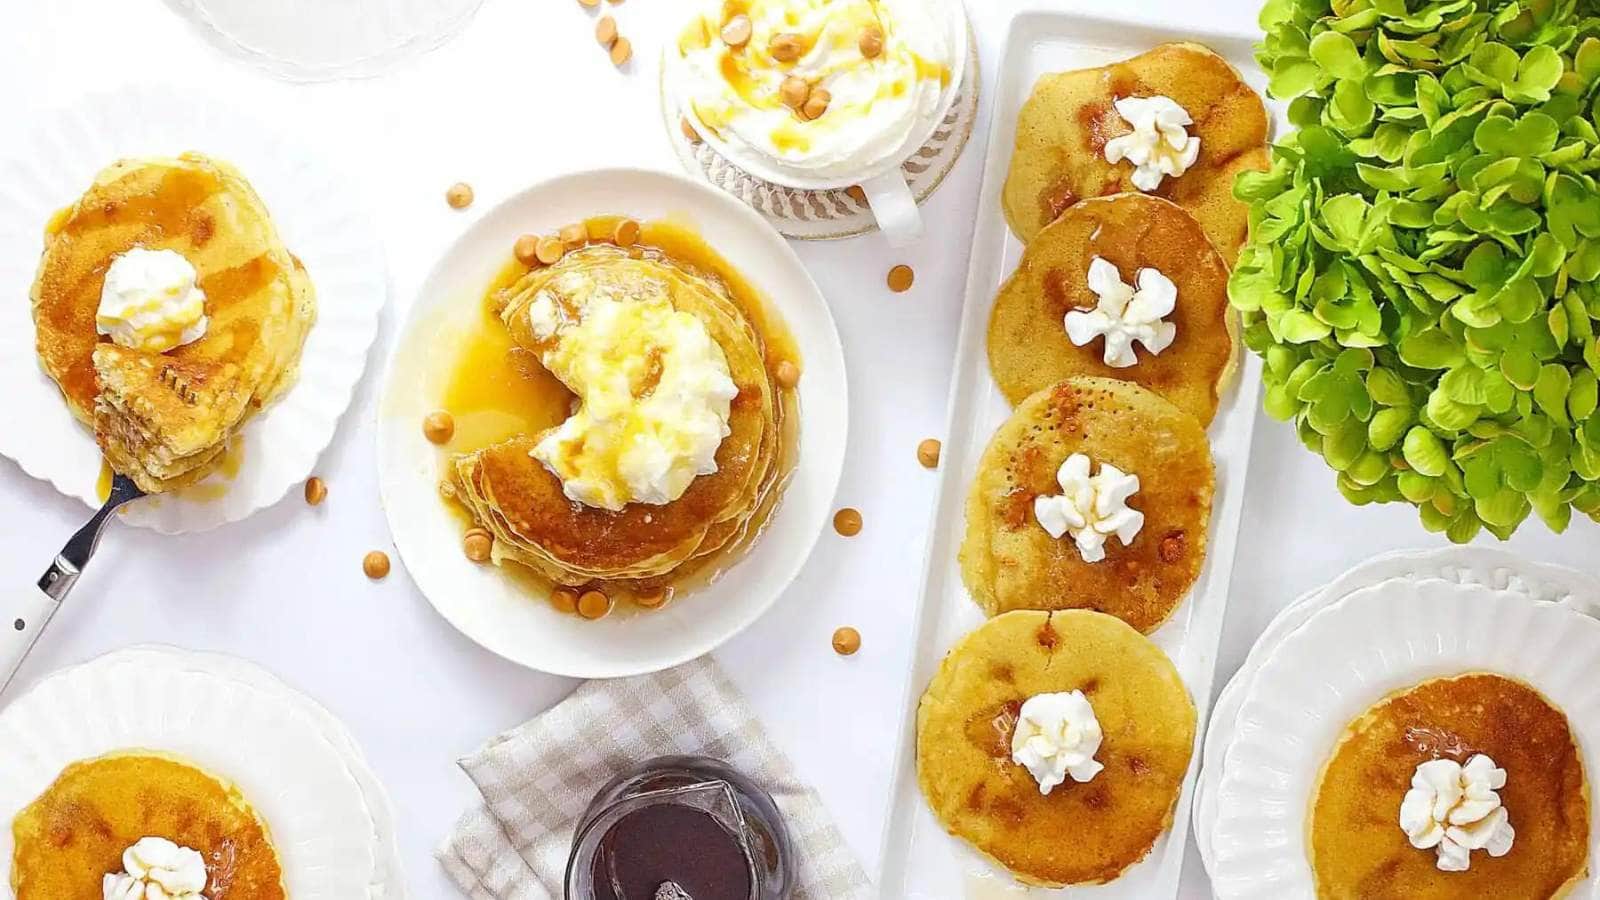 Harry Potter Butterbeer Pancakes recipe by Fun Money Mom.